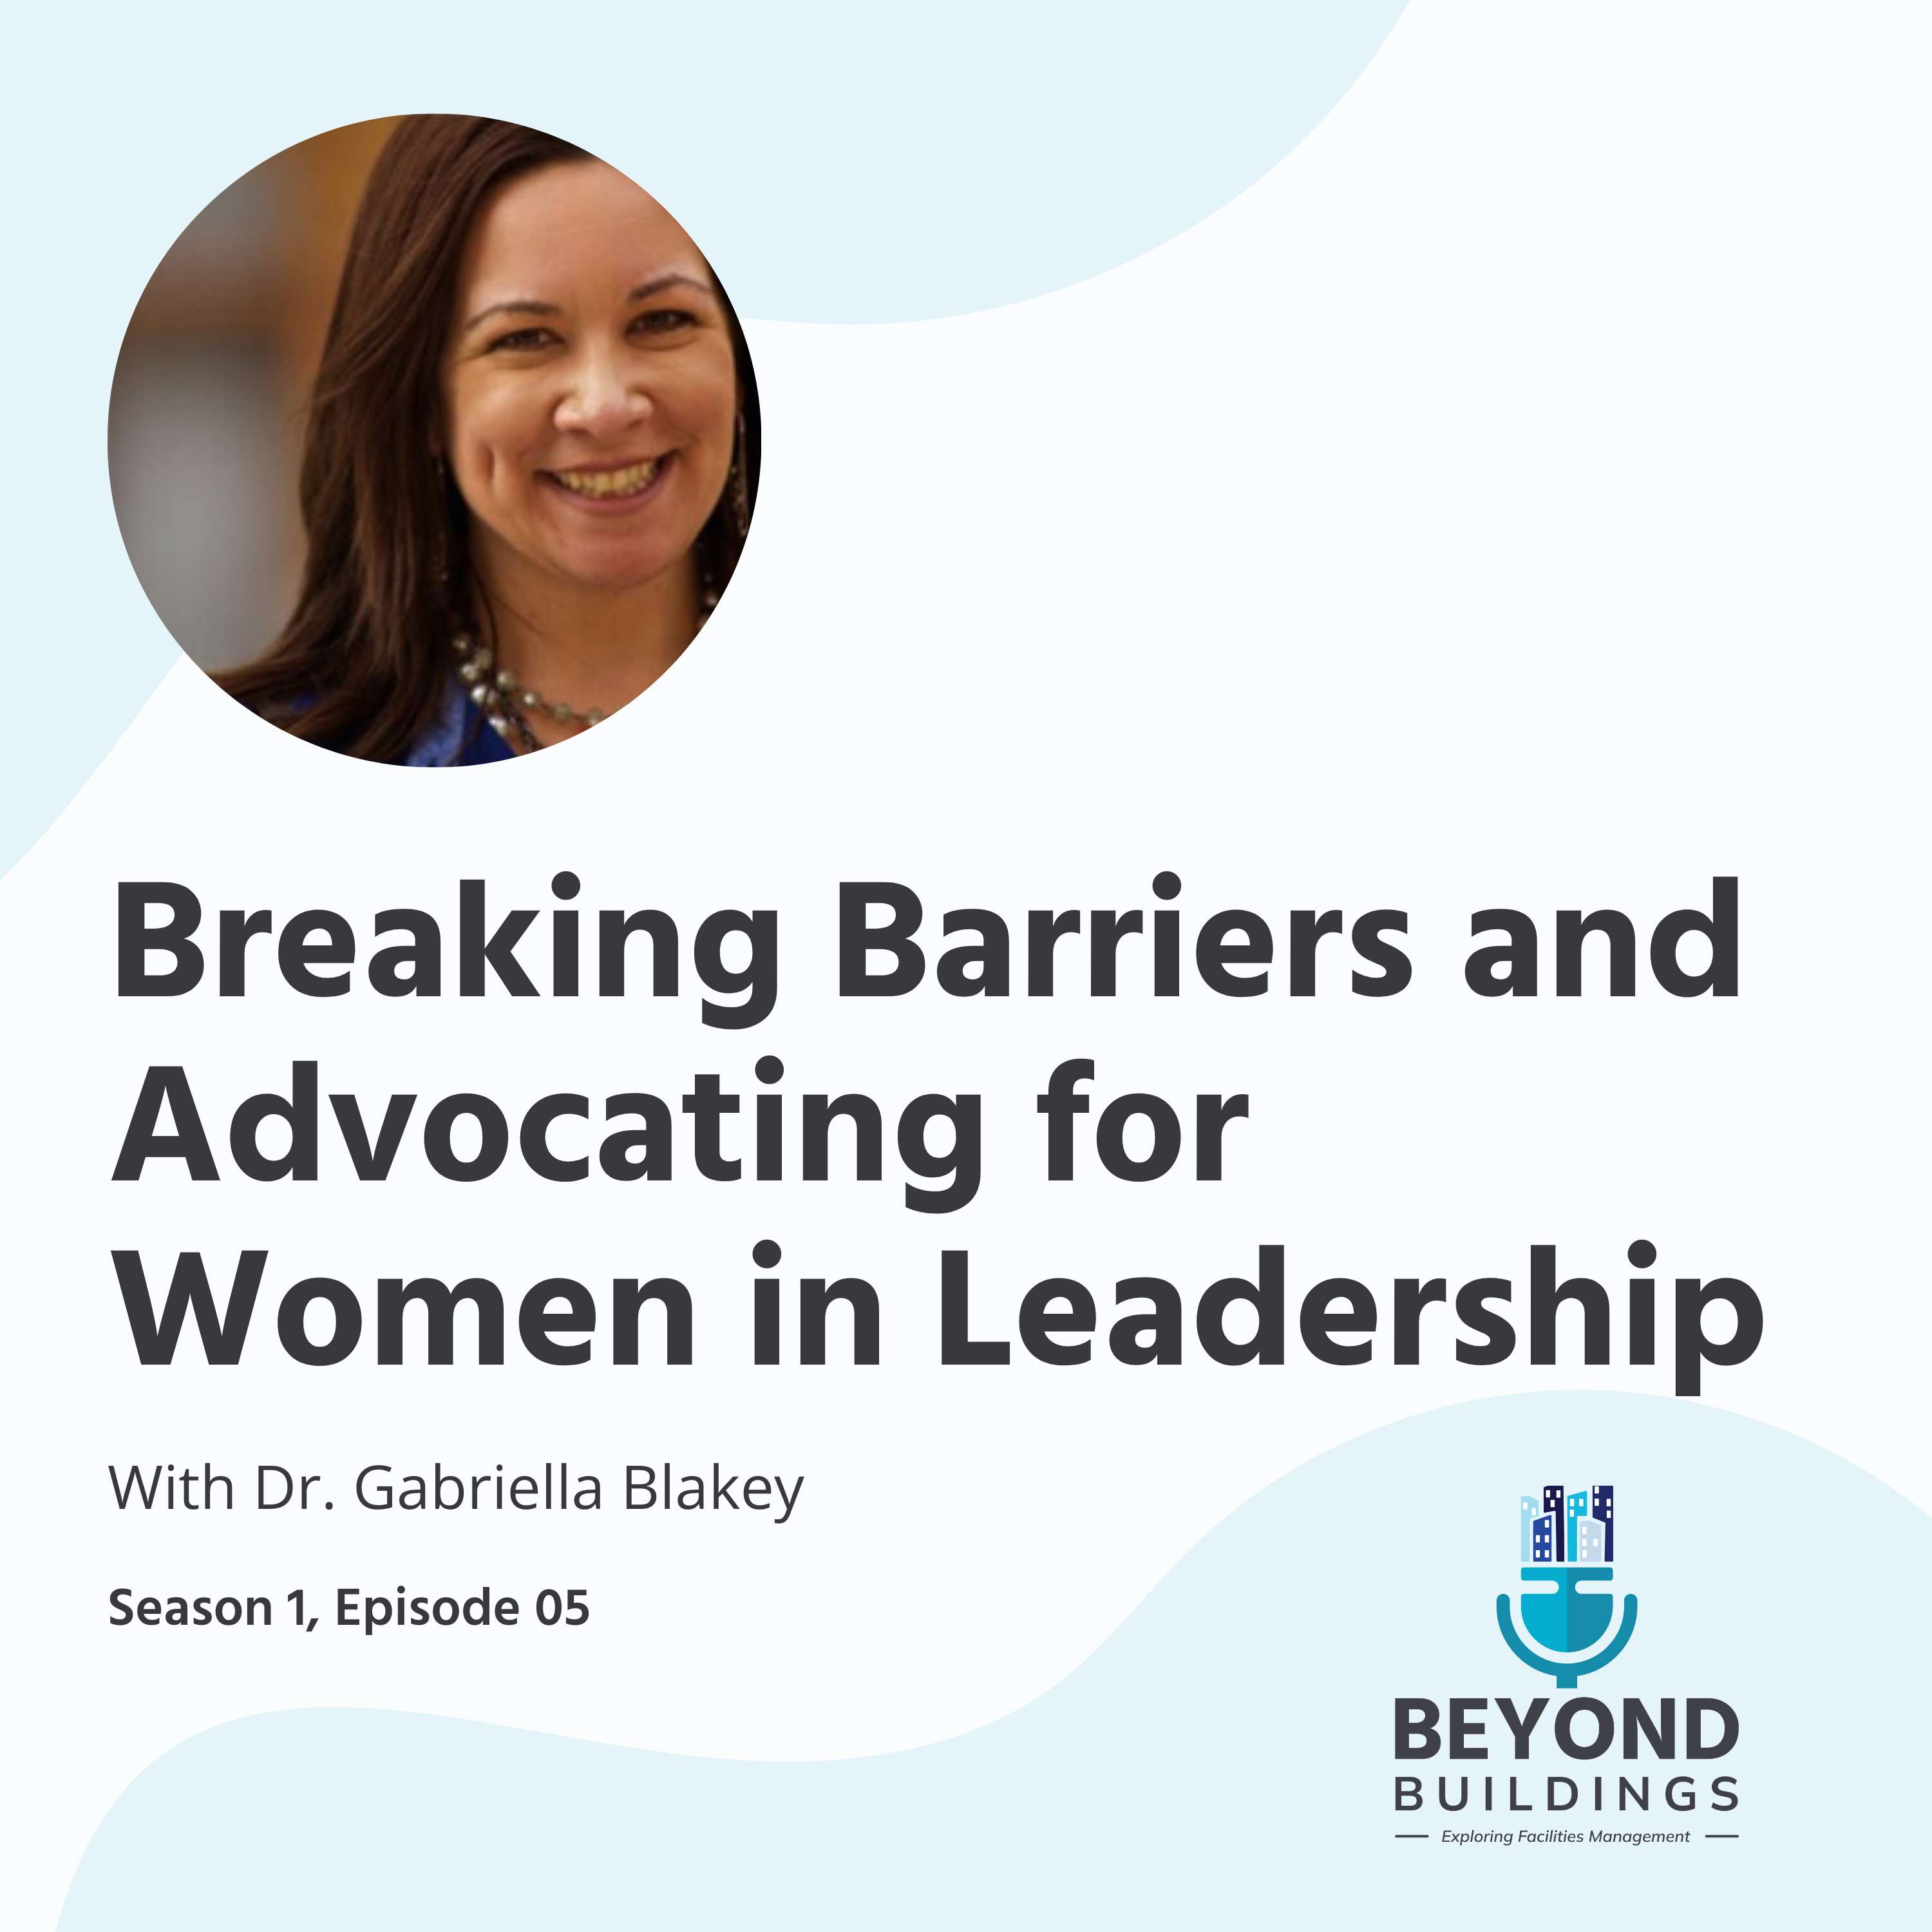 Breaking Barriers and Advocating for Women in Leadership